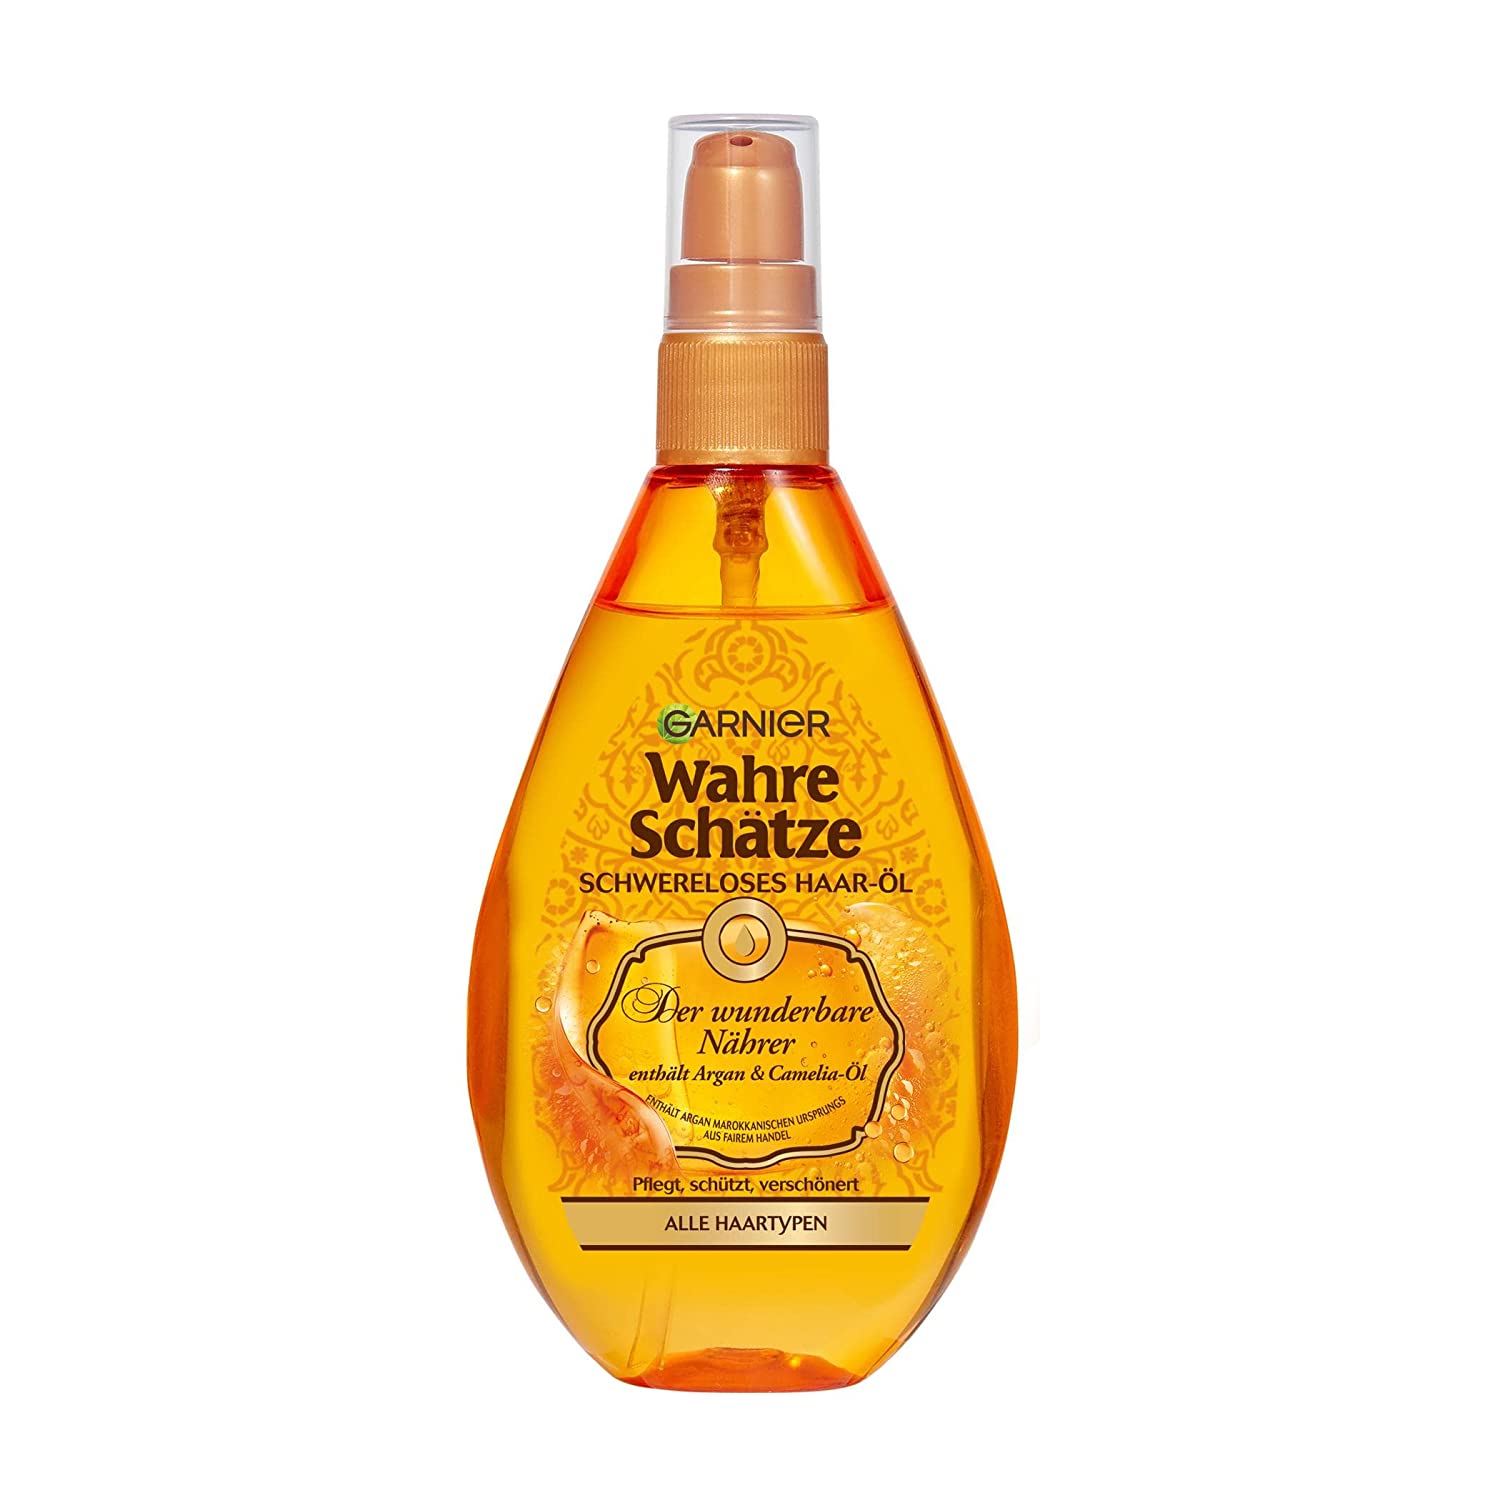 Garnier True Treasures Weightless Hair Oil Argan and Camelia Oil Nourishes and Pampers Dry Hair for Increased Shine and Suppleness, 150ml